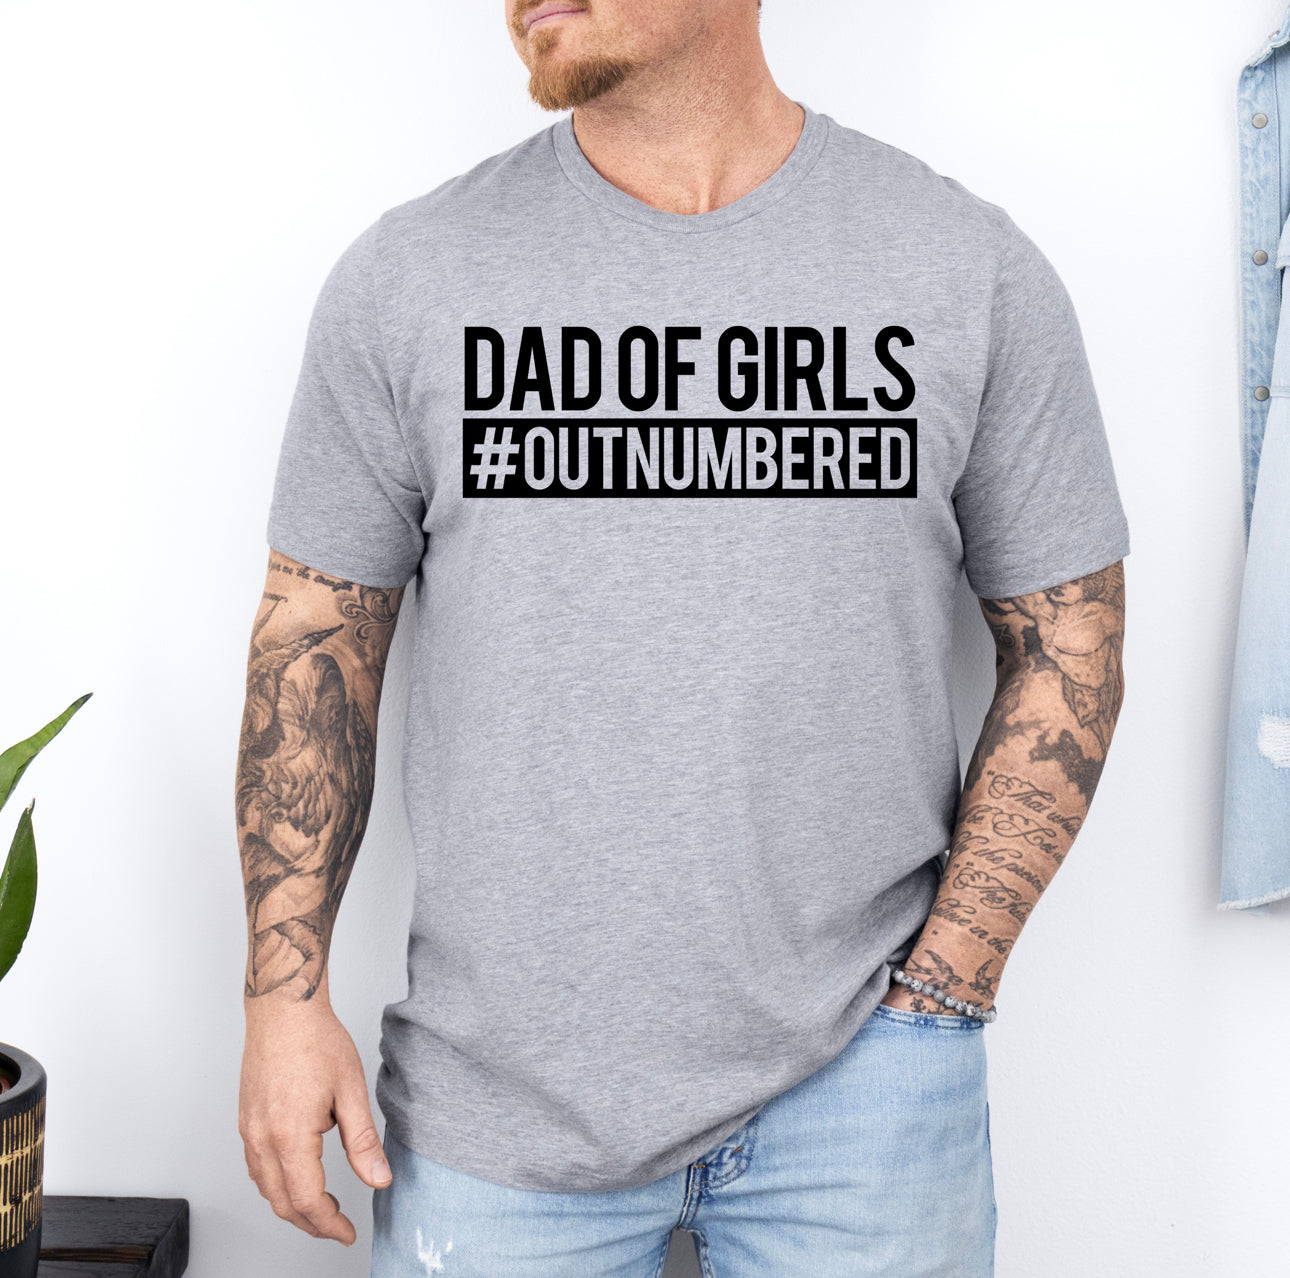 Dad of Girls #Outnumbered T-Shirt, Funny Dad Shirt, Dad Life Tee, Birthday Dad Gift, Sarcastic Shirt, Fathers Day Gift